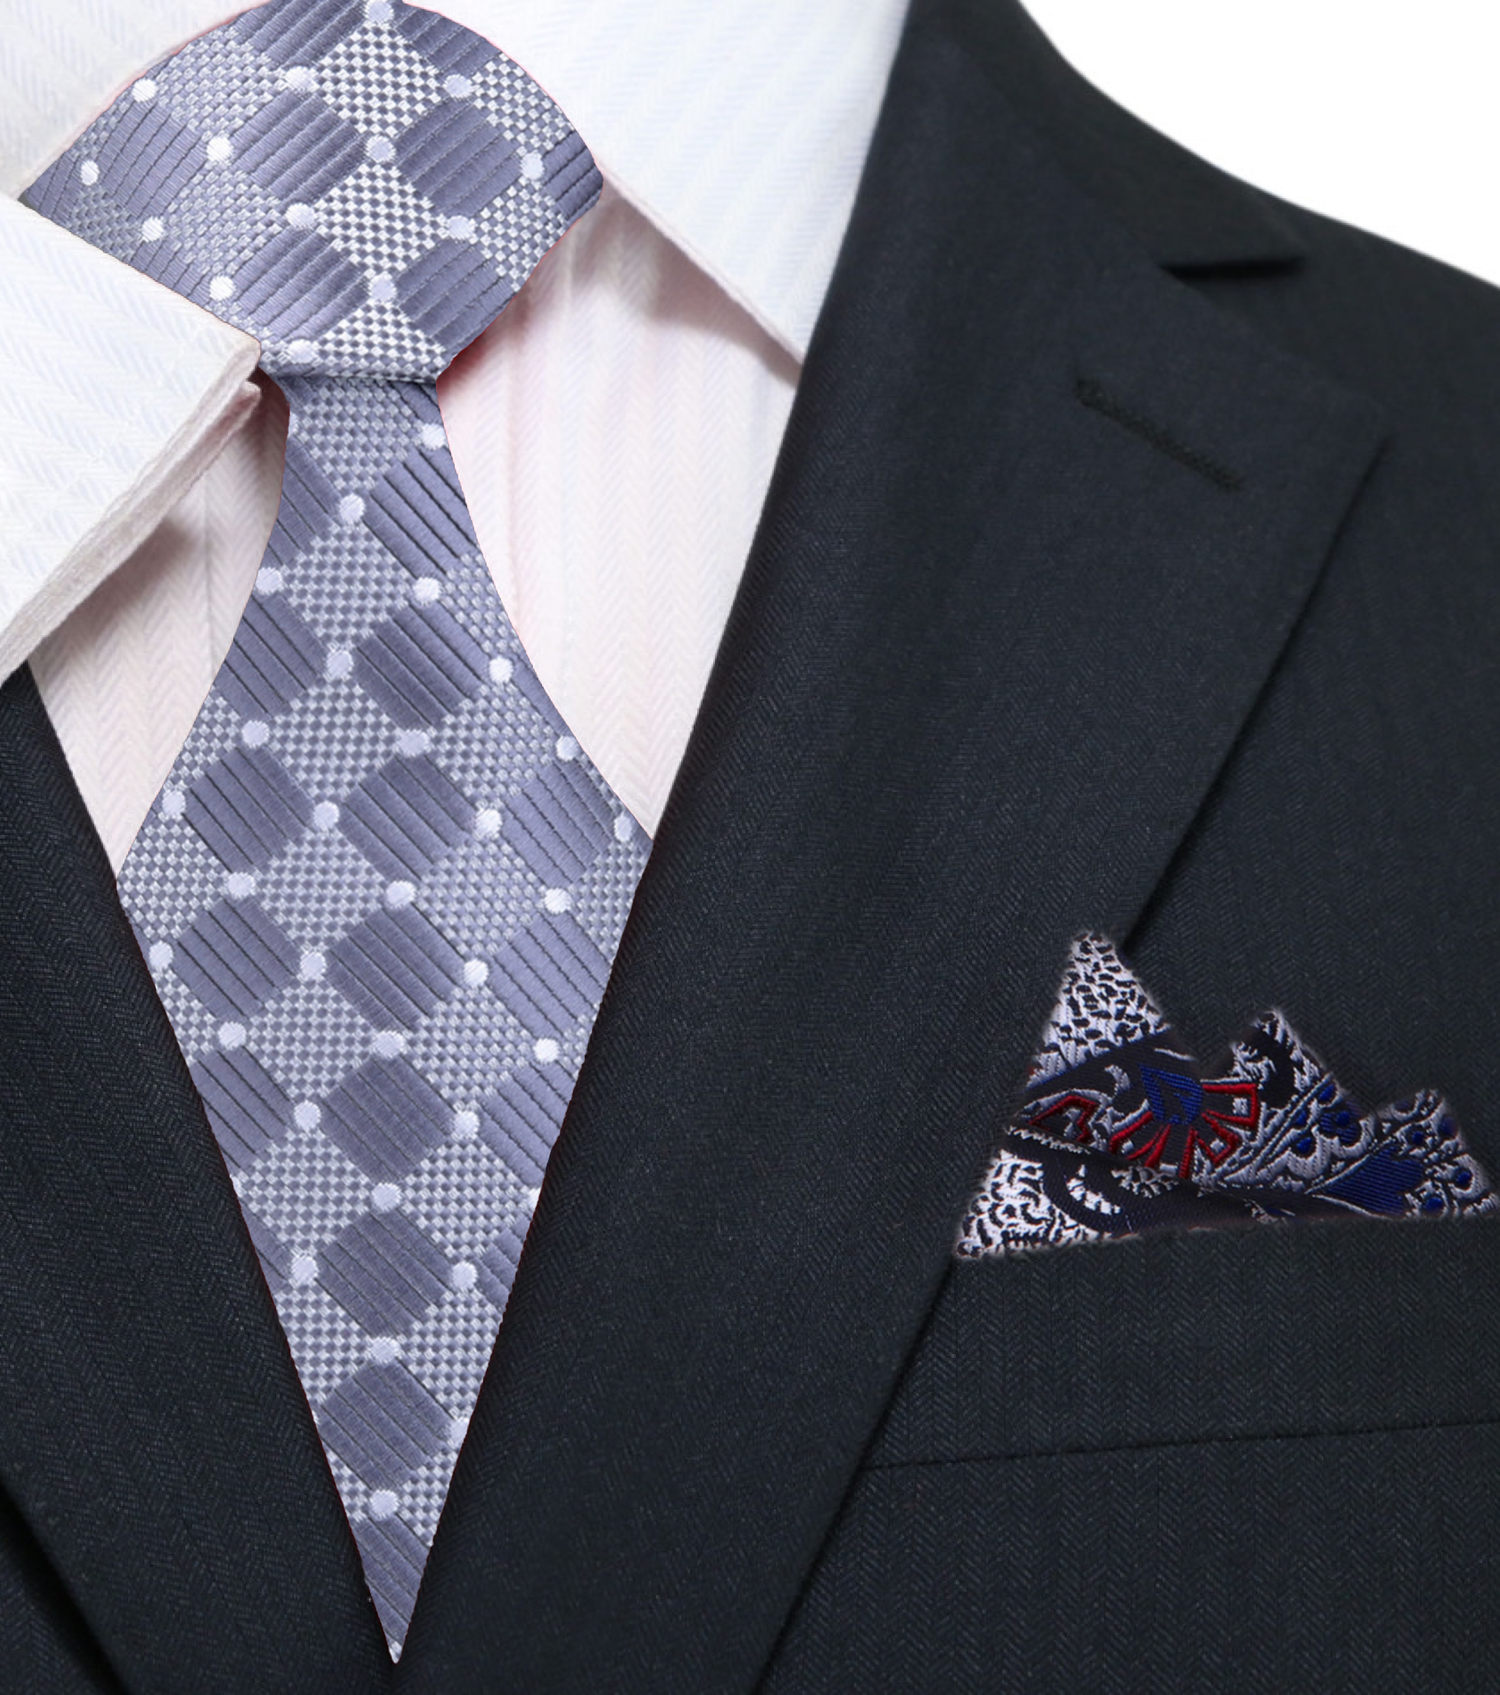 Main View: Grey, White Geometric Necktie with Grey, Black, Red Paisley Pocket Square